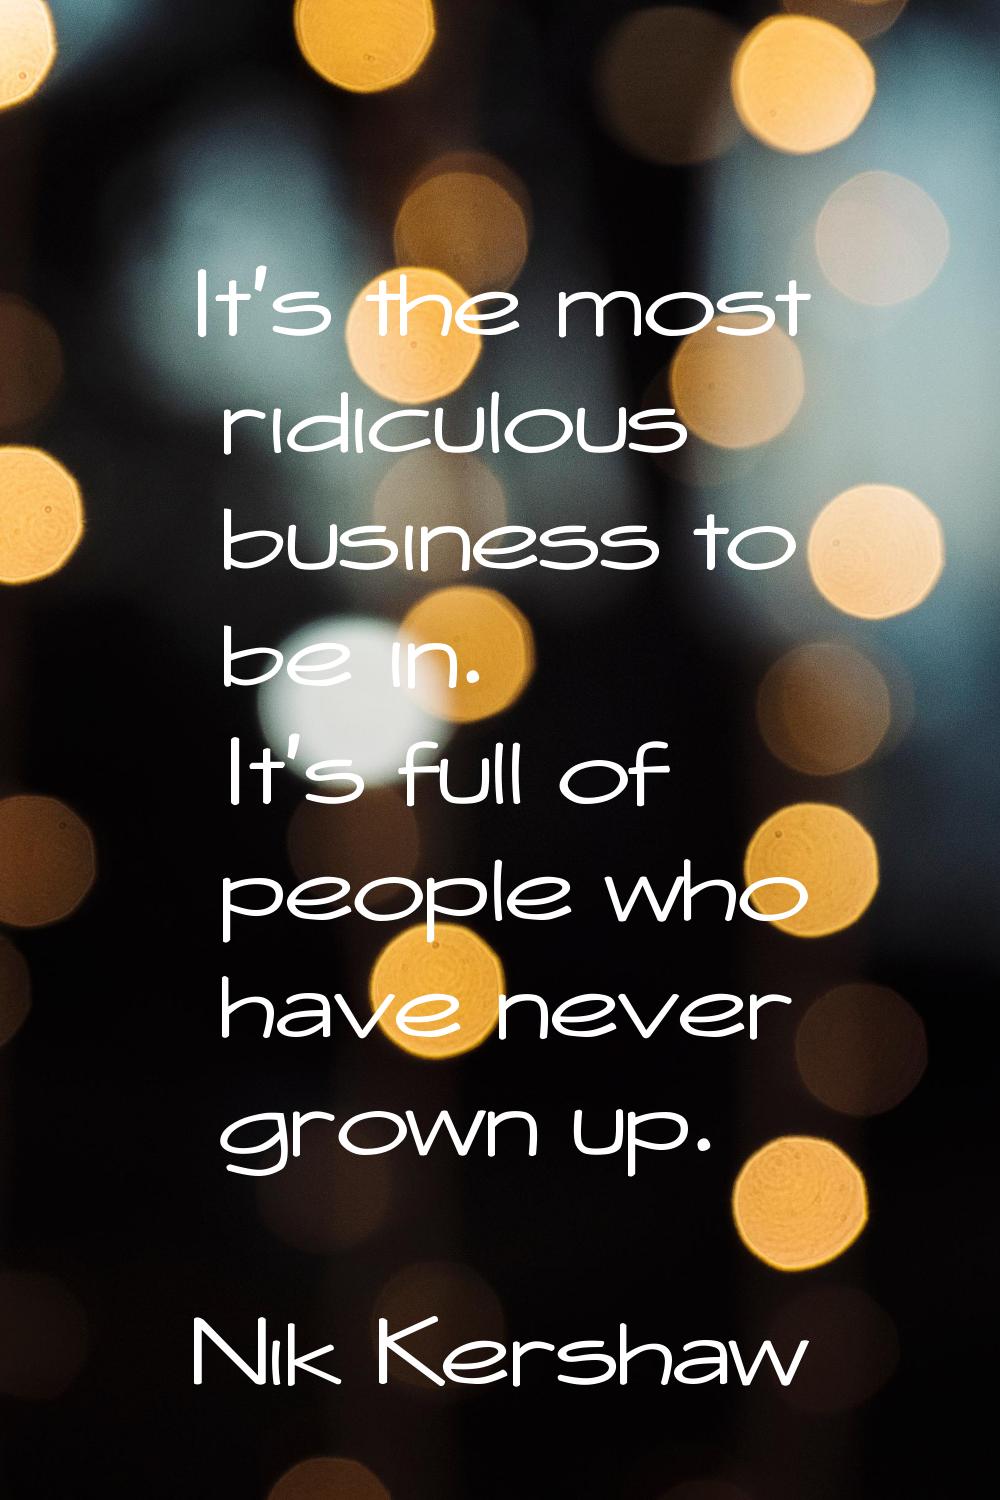 It's the most ridiculous business to be in. It's full of people who have never grown up.